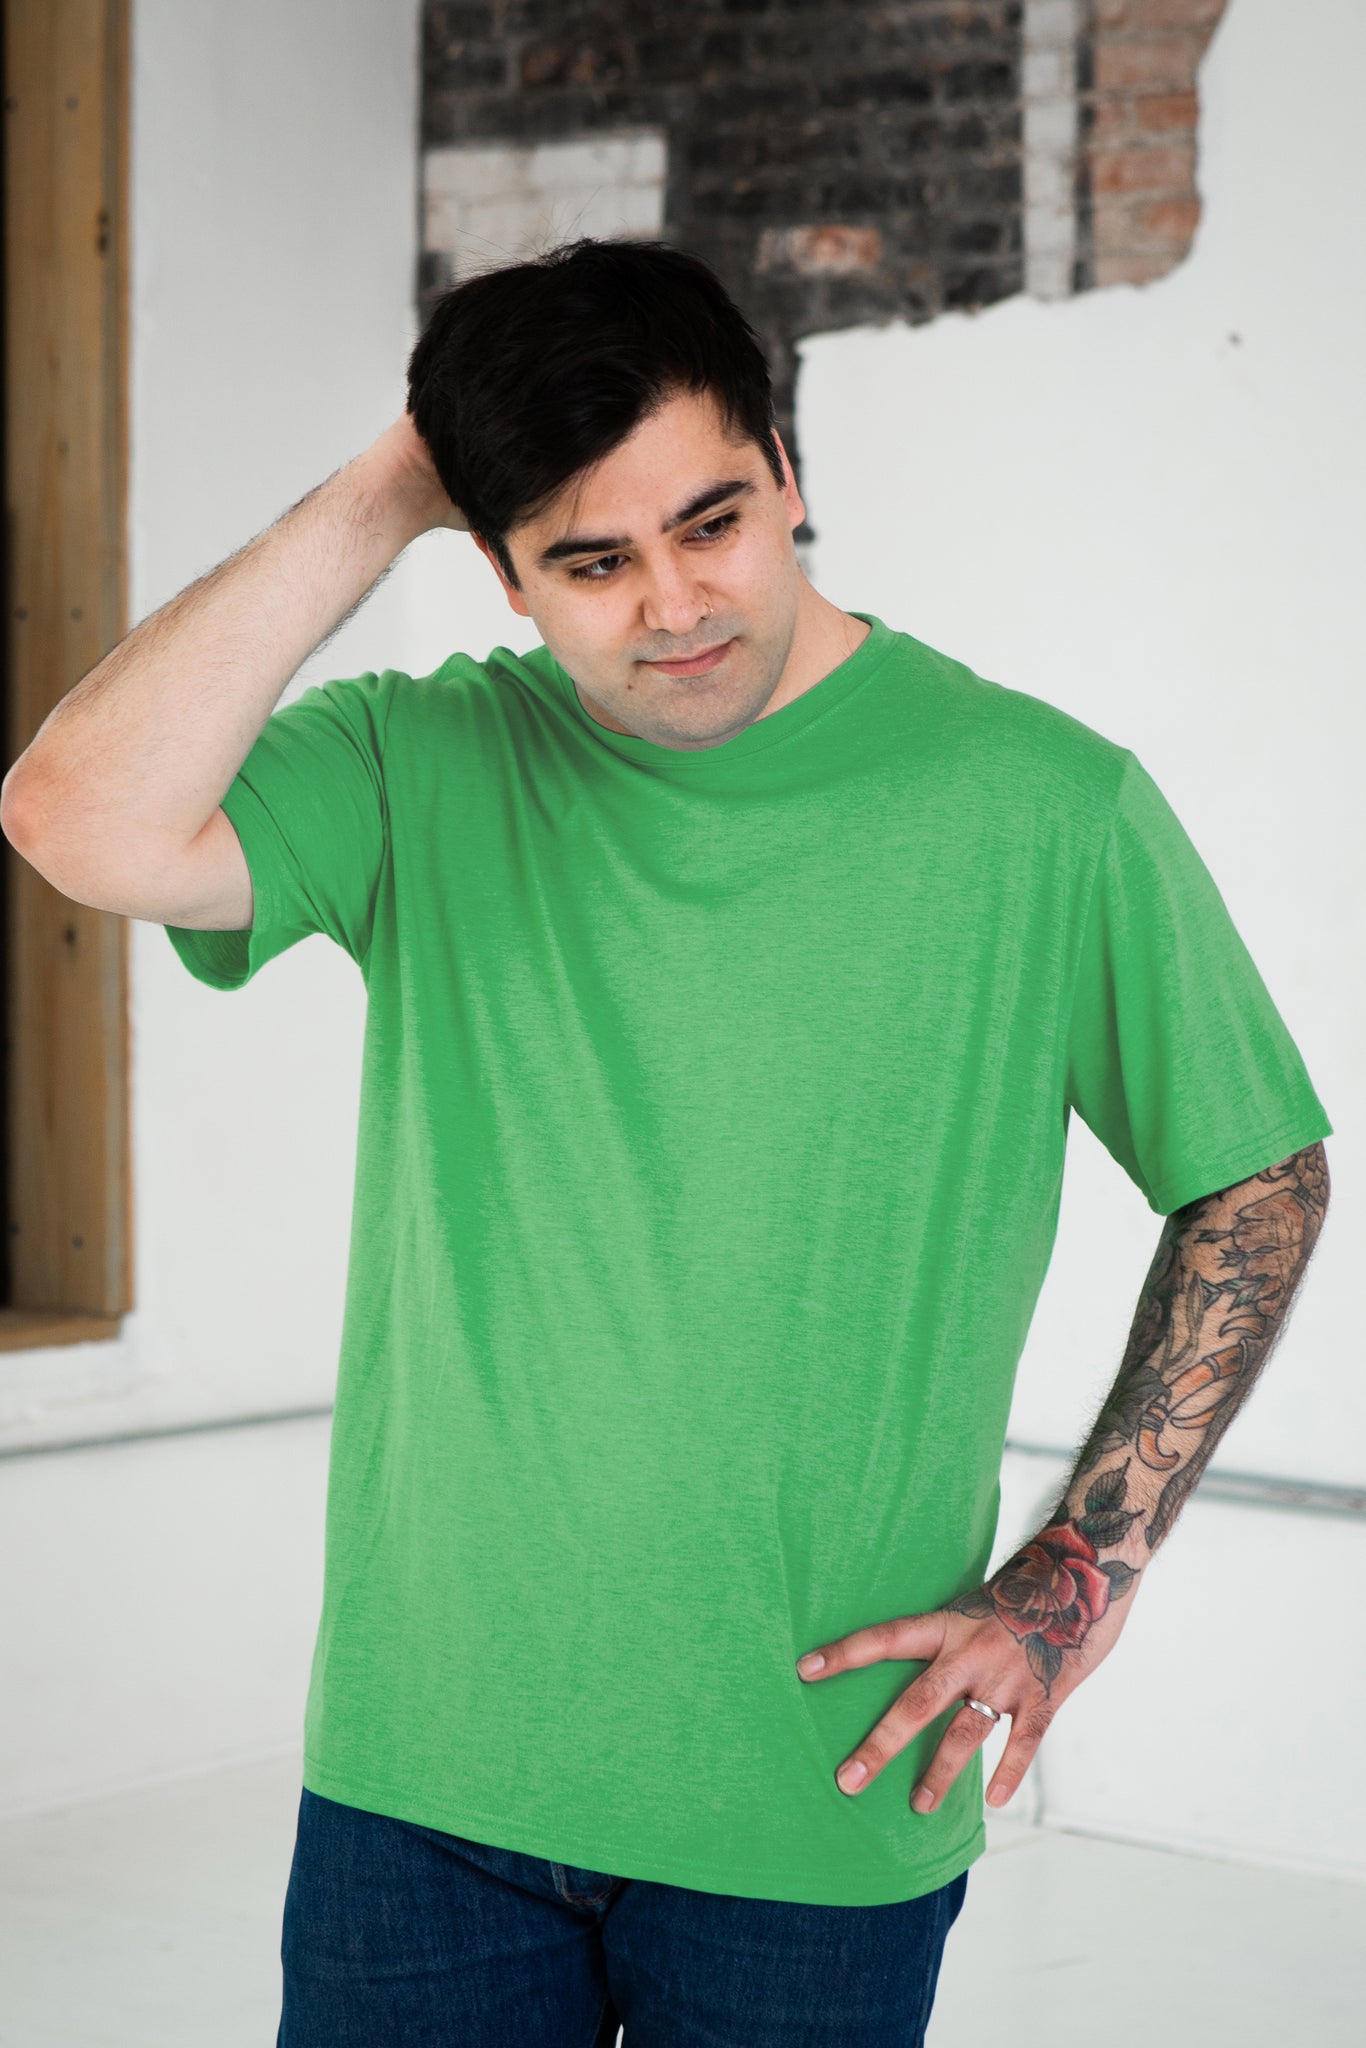 Male Model wearing GOEX Eco Triblend Unisex and Men's Tee in Grass